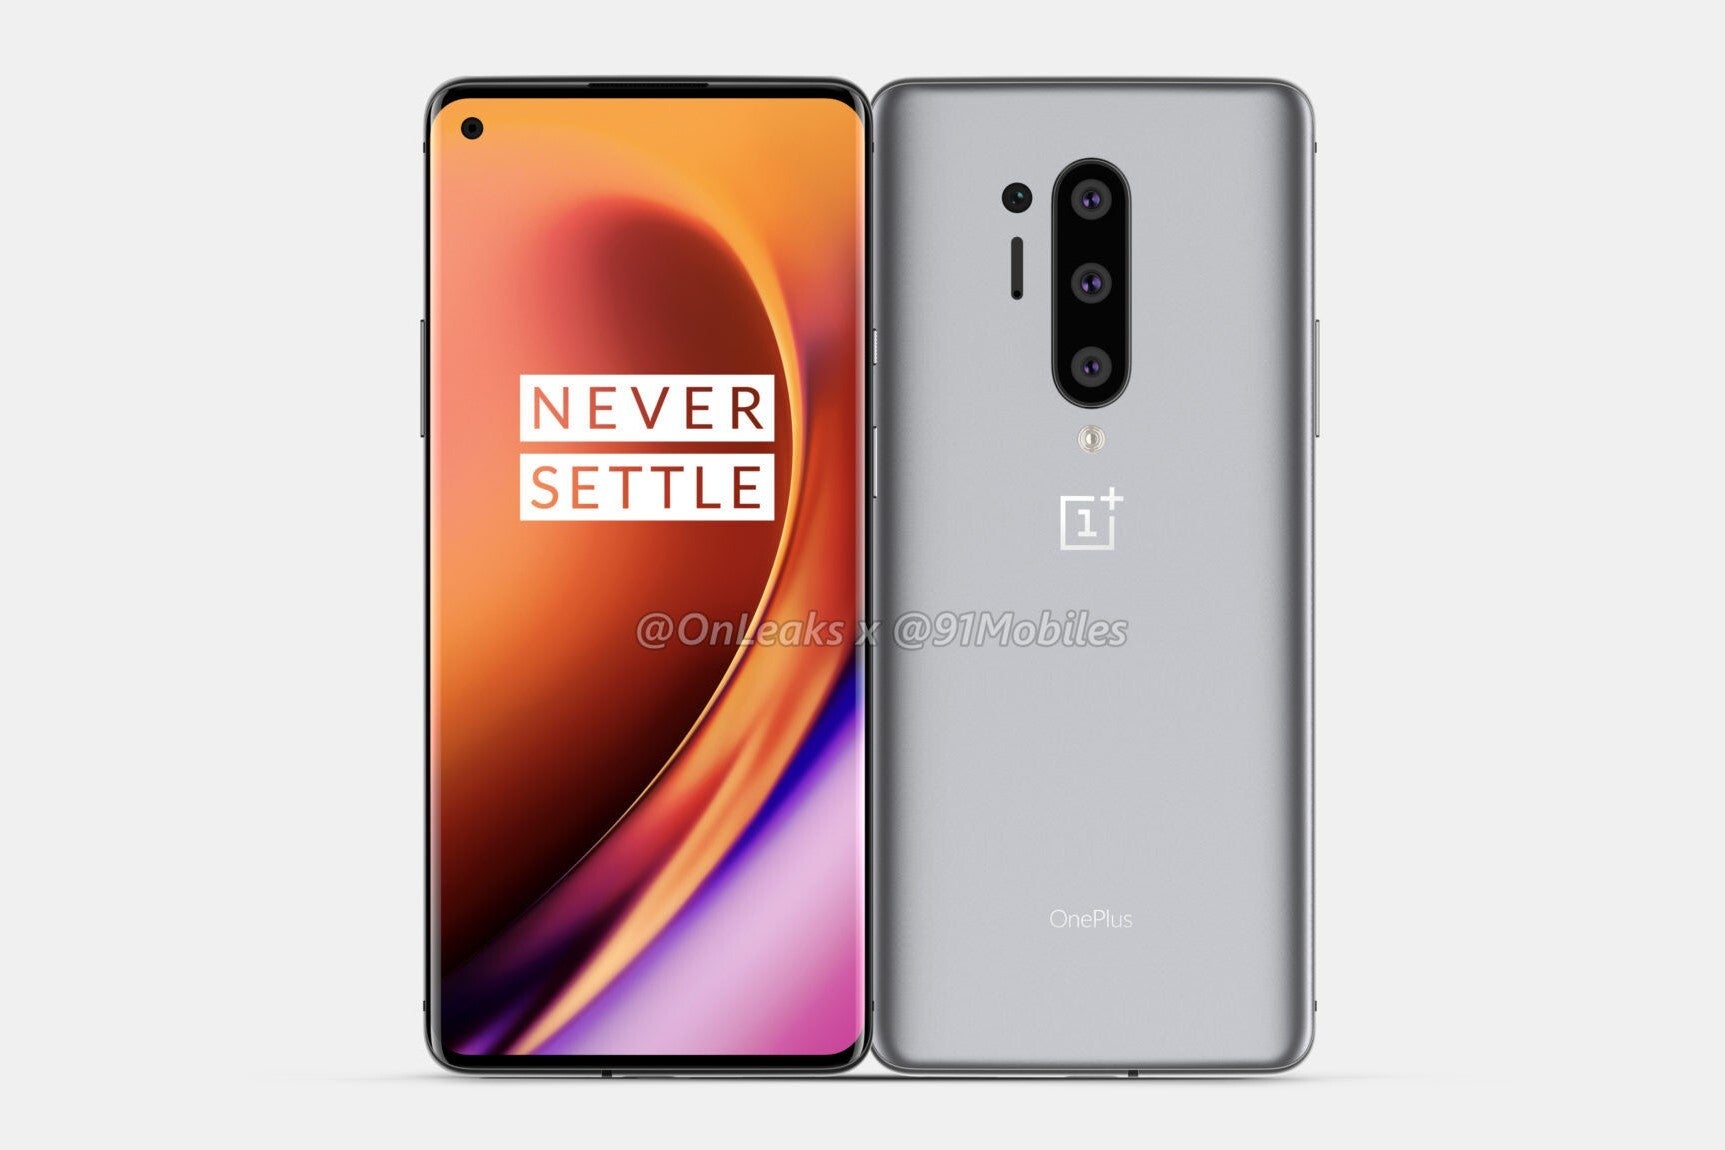 OnePlus 8 Pro CAD-based render - The OnePlus 8 Pro could sport IP68 water and dust resistance